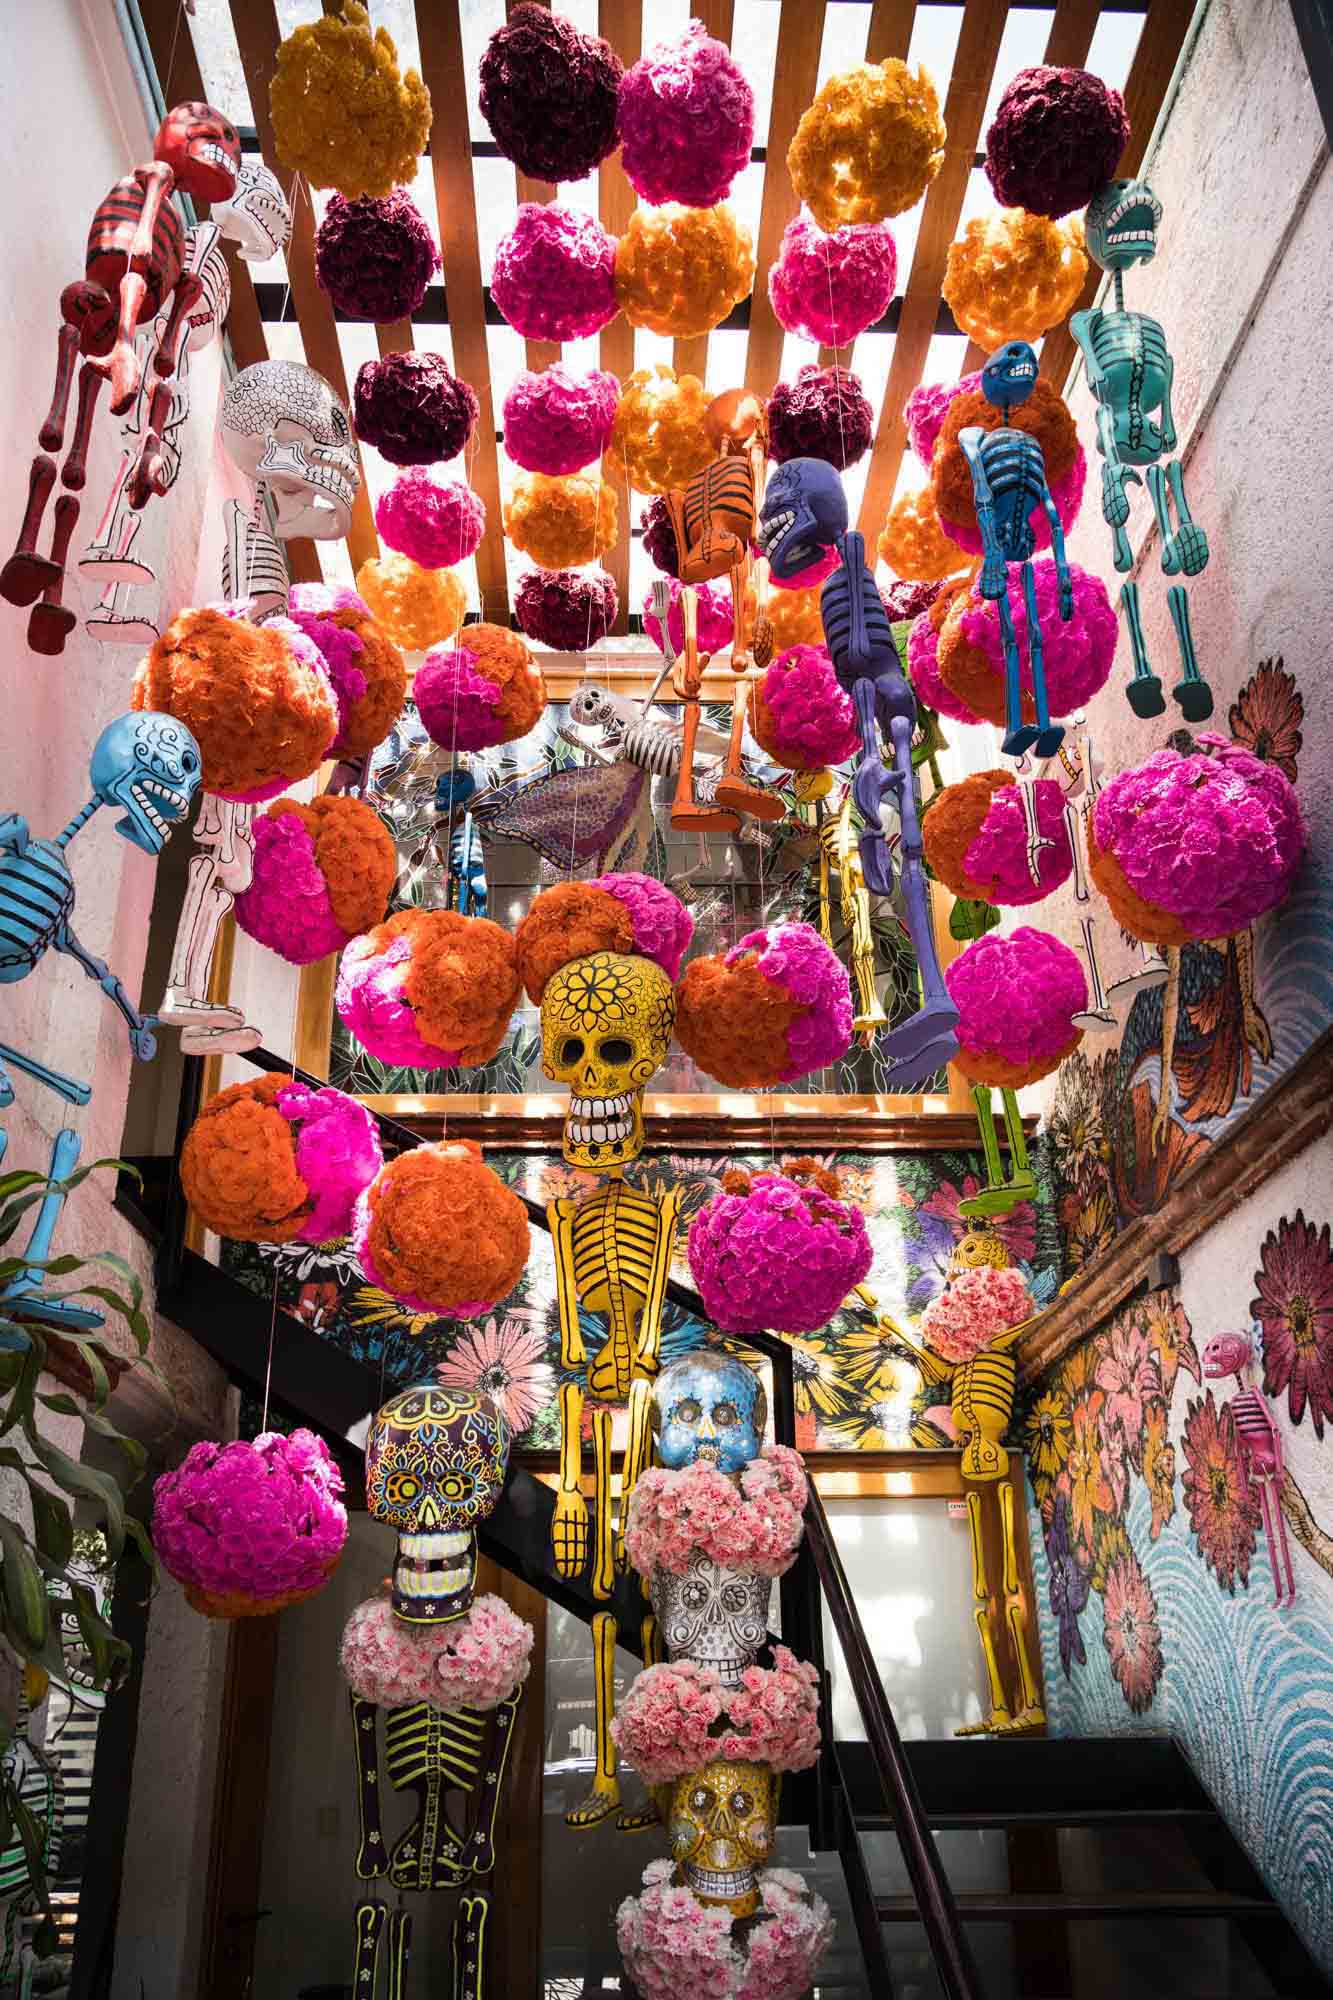 Colorful decorations and skeletons outside a shop in Mexico City